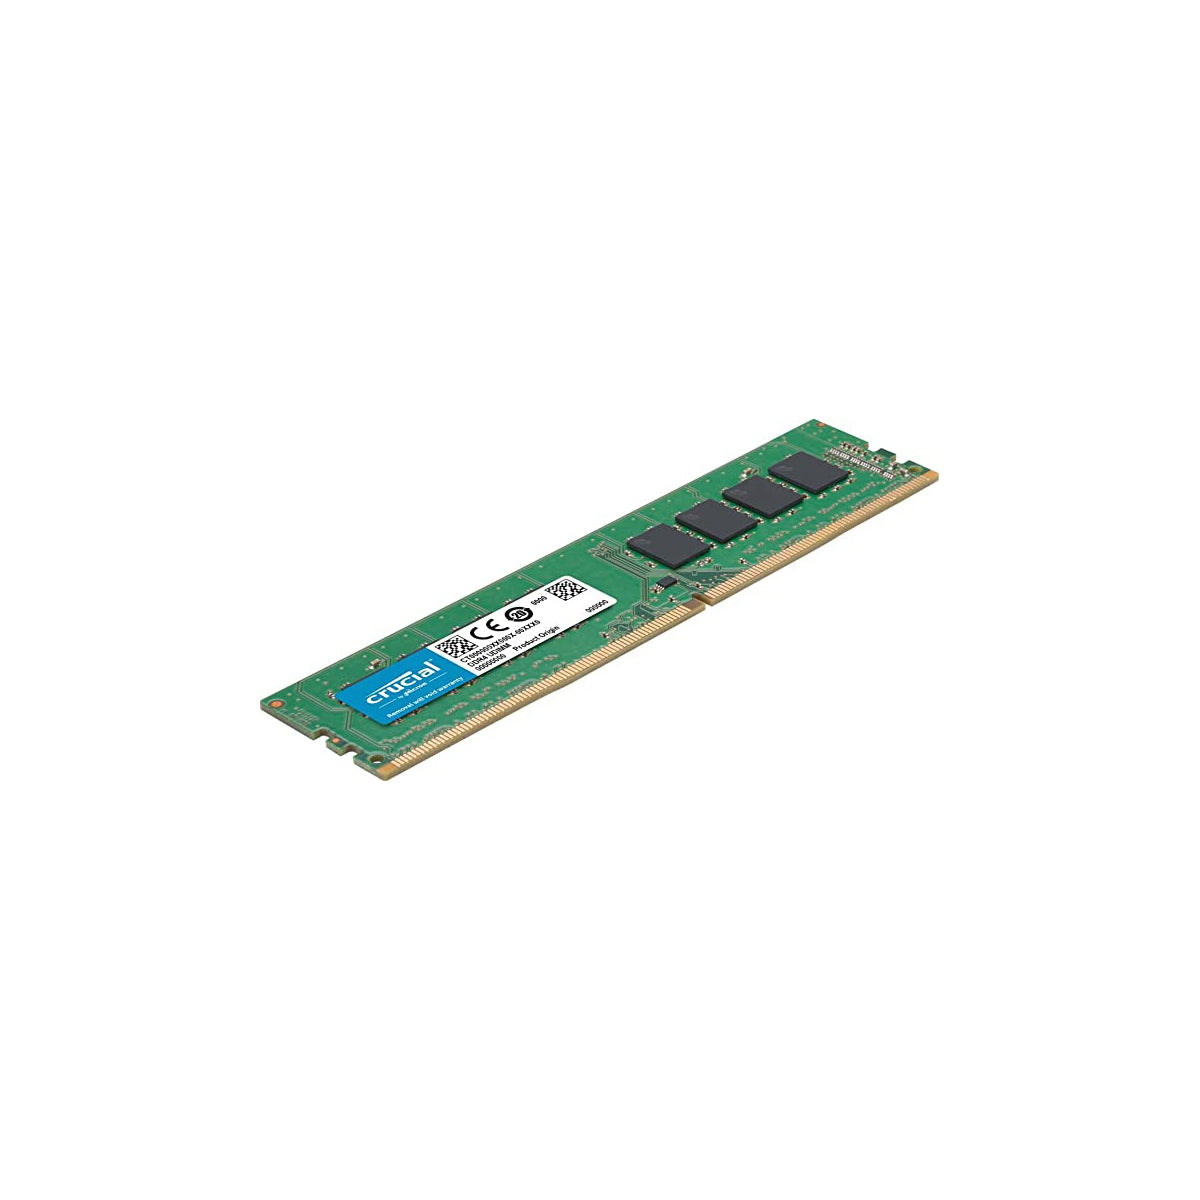 MEMORIA DIMM DDR4 CRUCIAL (CT16G4DFRA266) 16GB 2666MHZ, CL19